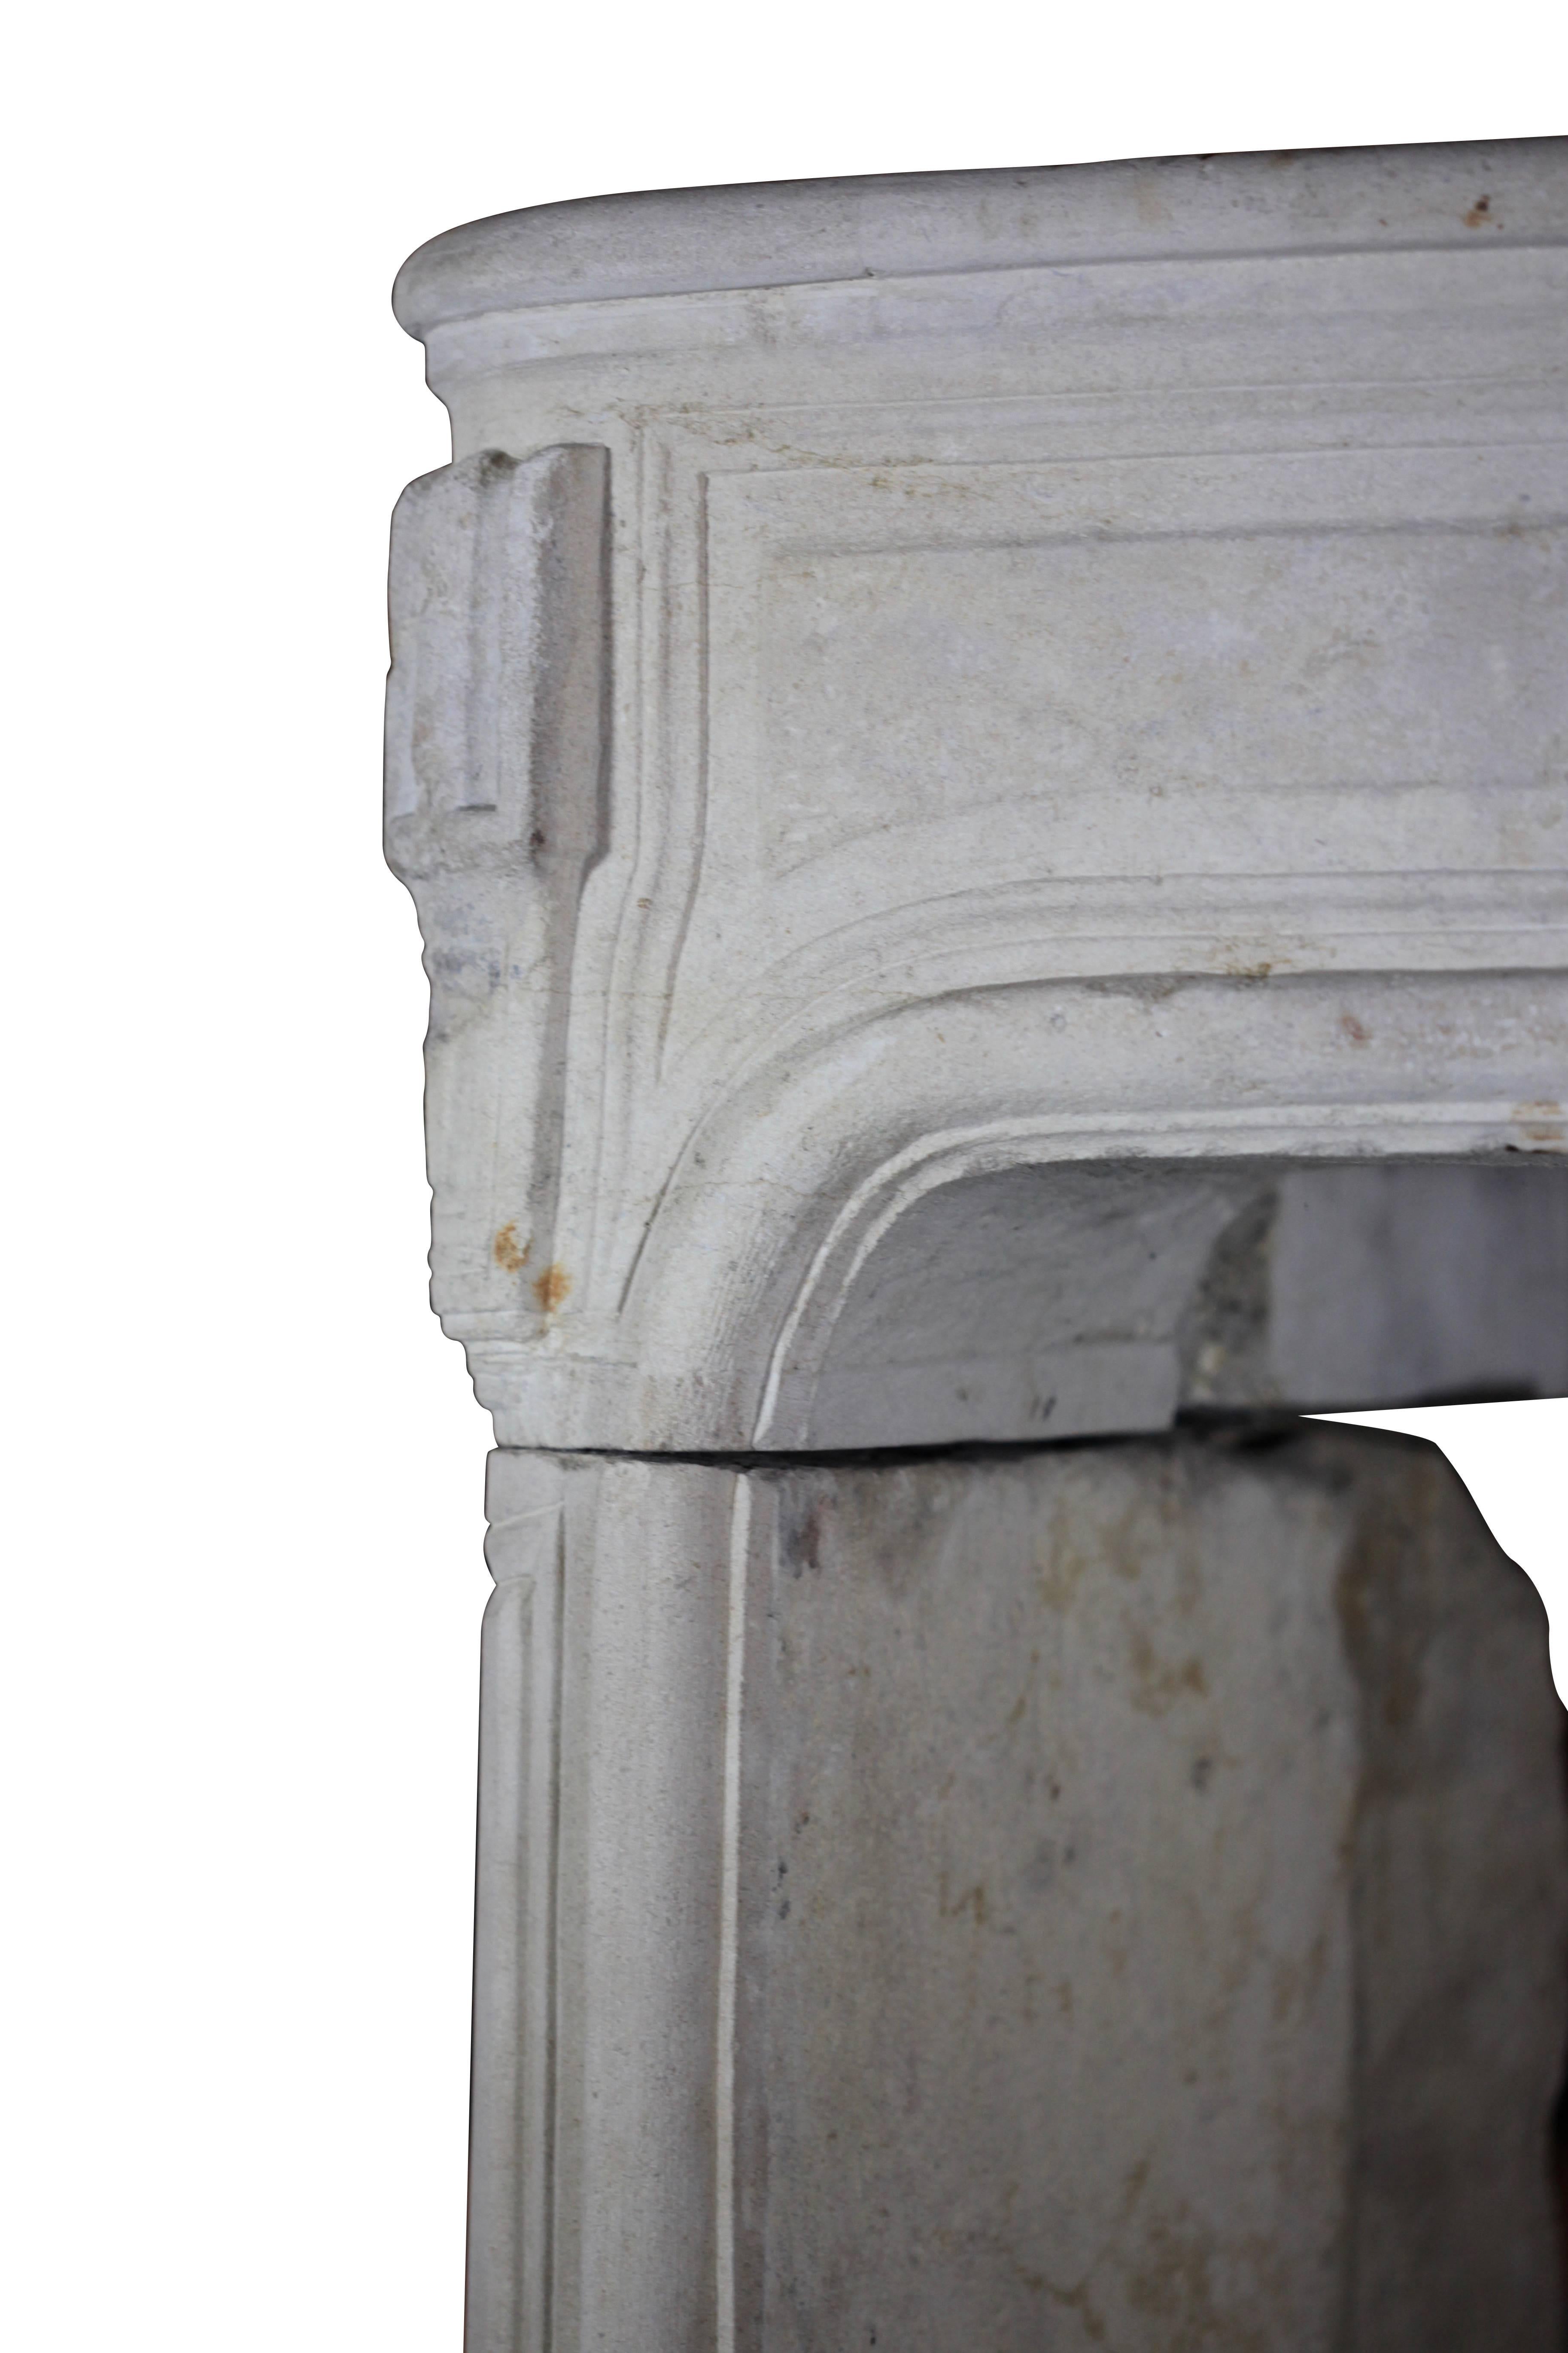 Fine French original antique fireplace surround in limestone from the early Regency period. The jambs have Louis XIV period details. Perfect to create a European country room.
Measures:
166 cm EW 65.35